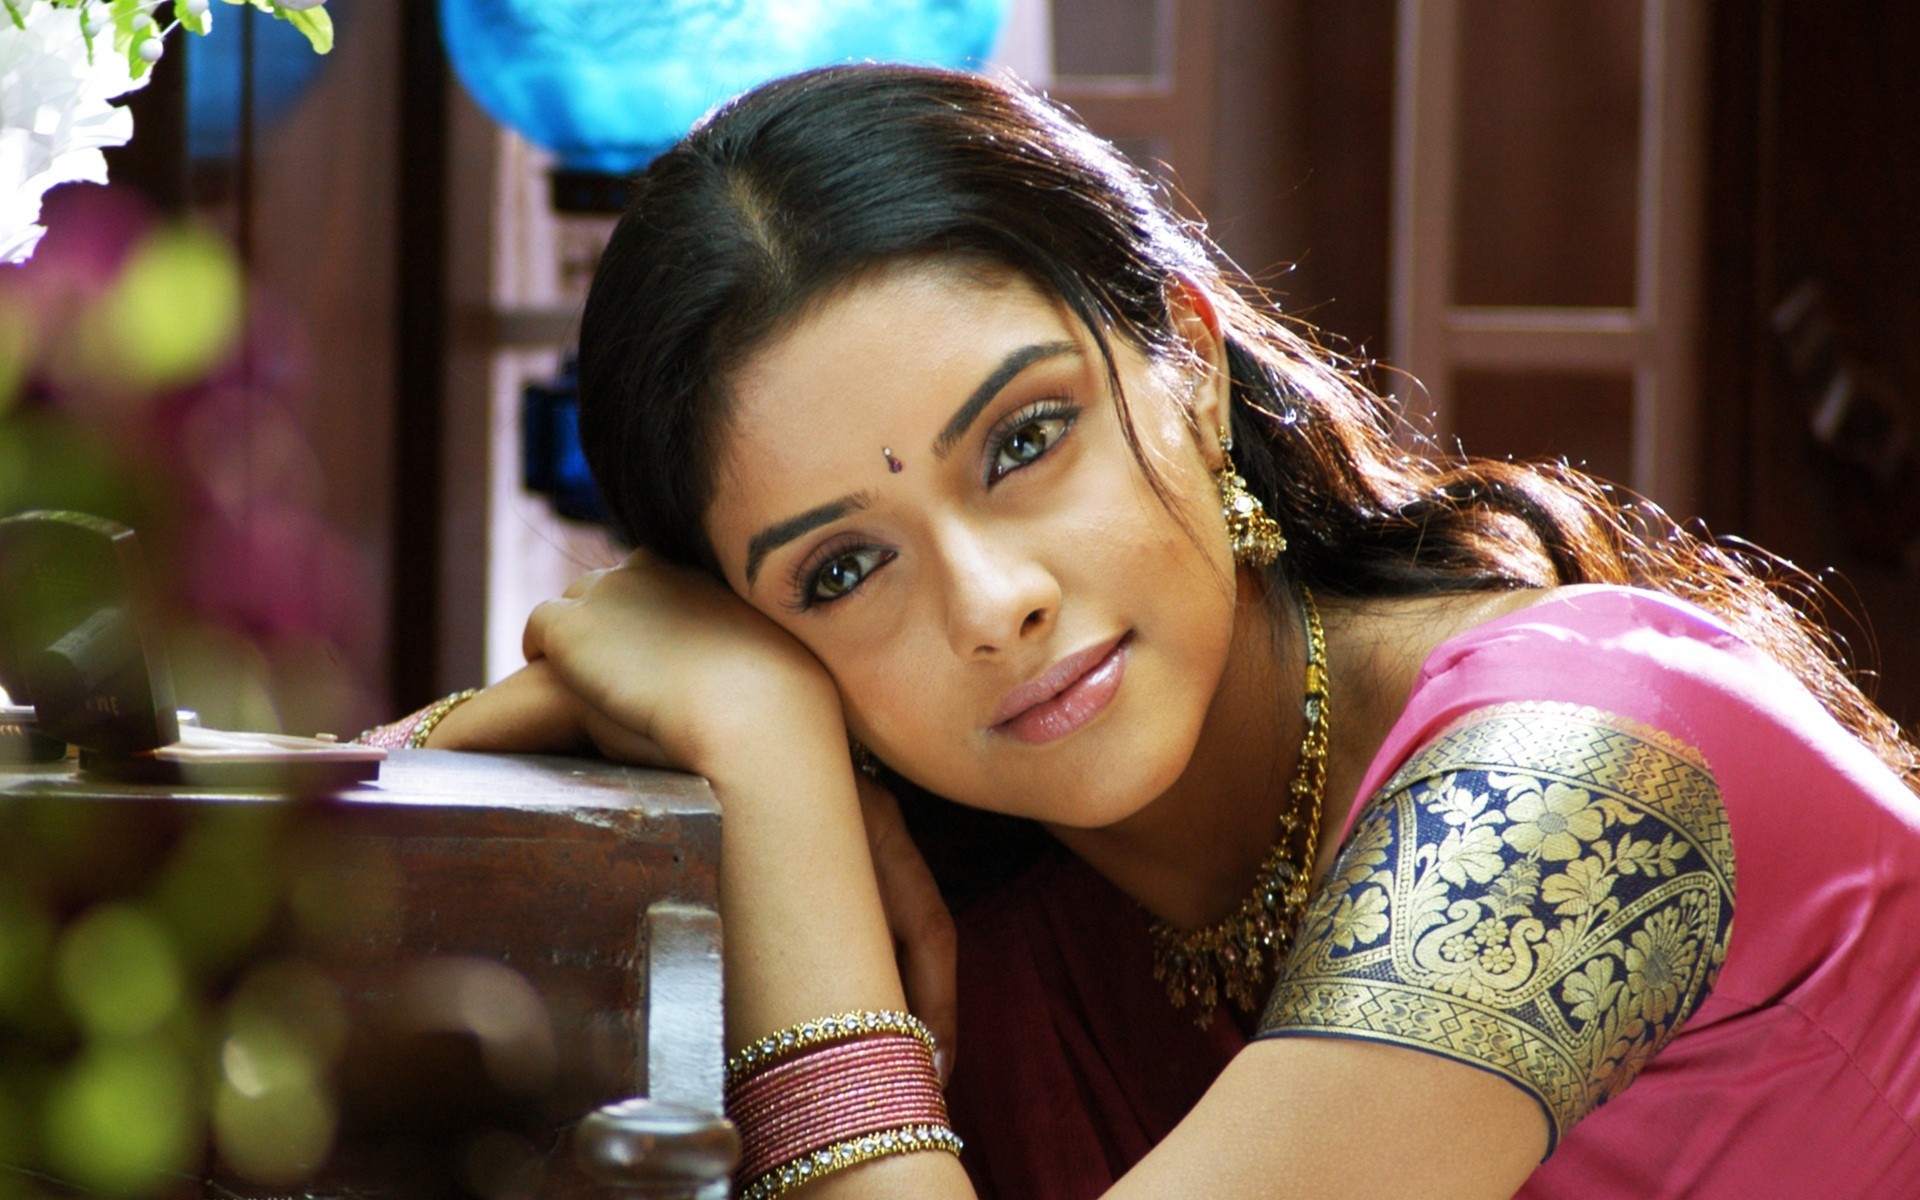 Asin look in south indian movie wallpaper